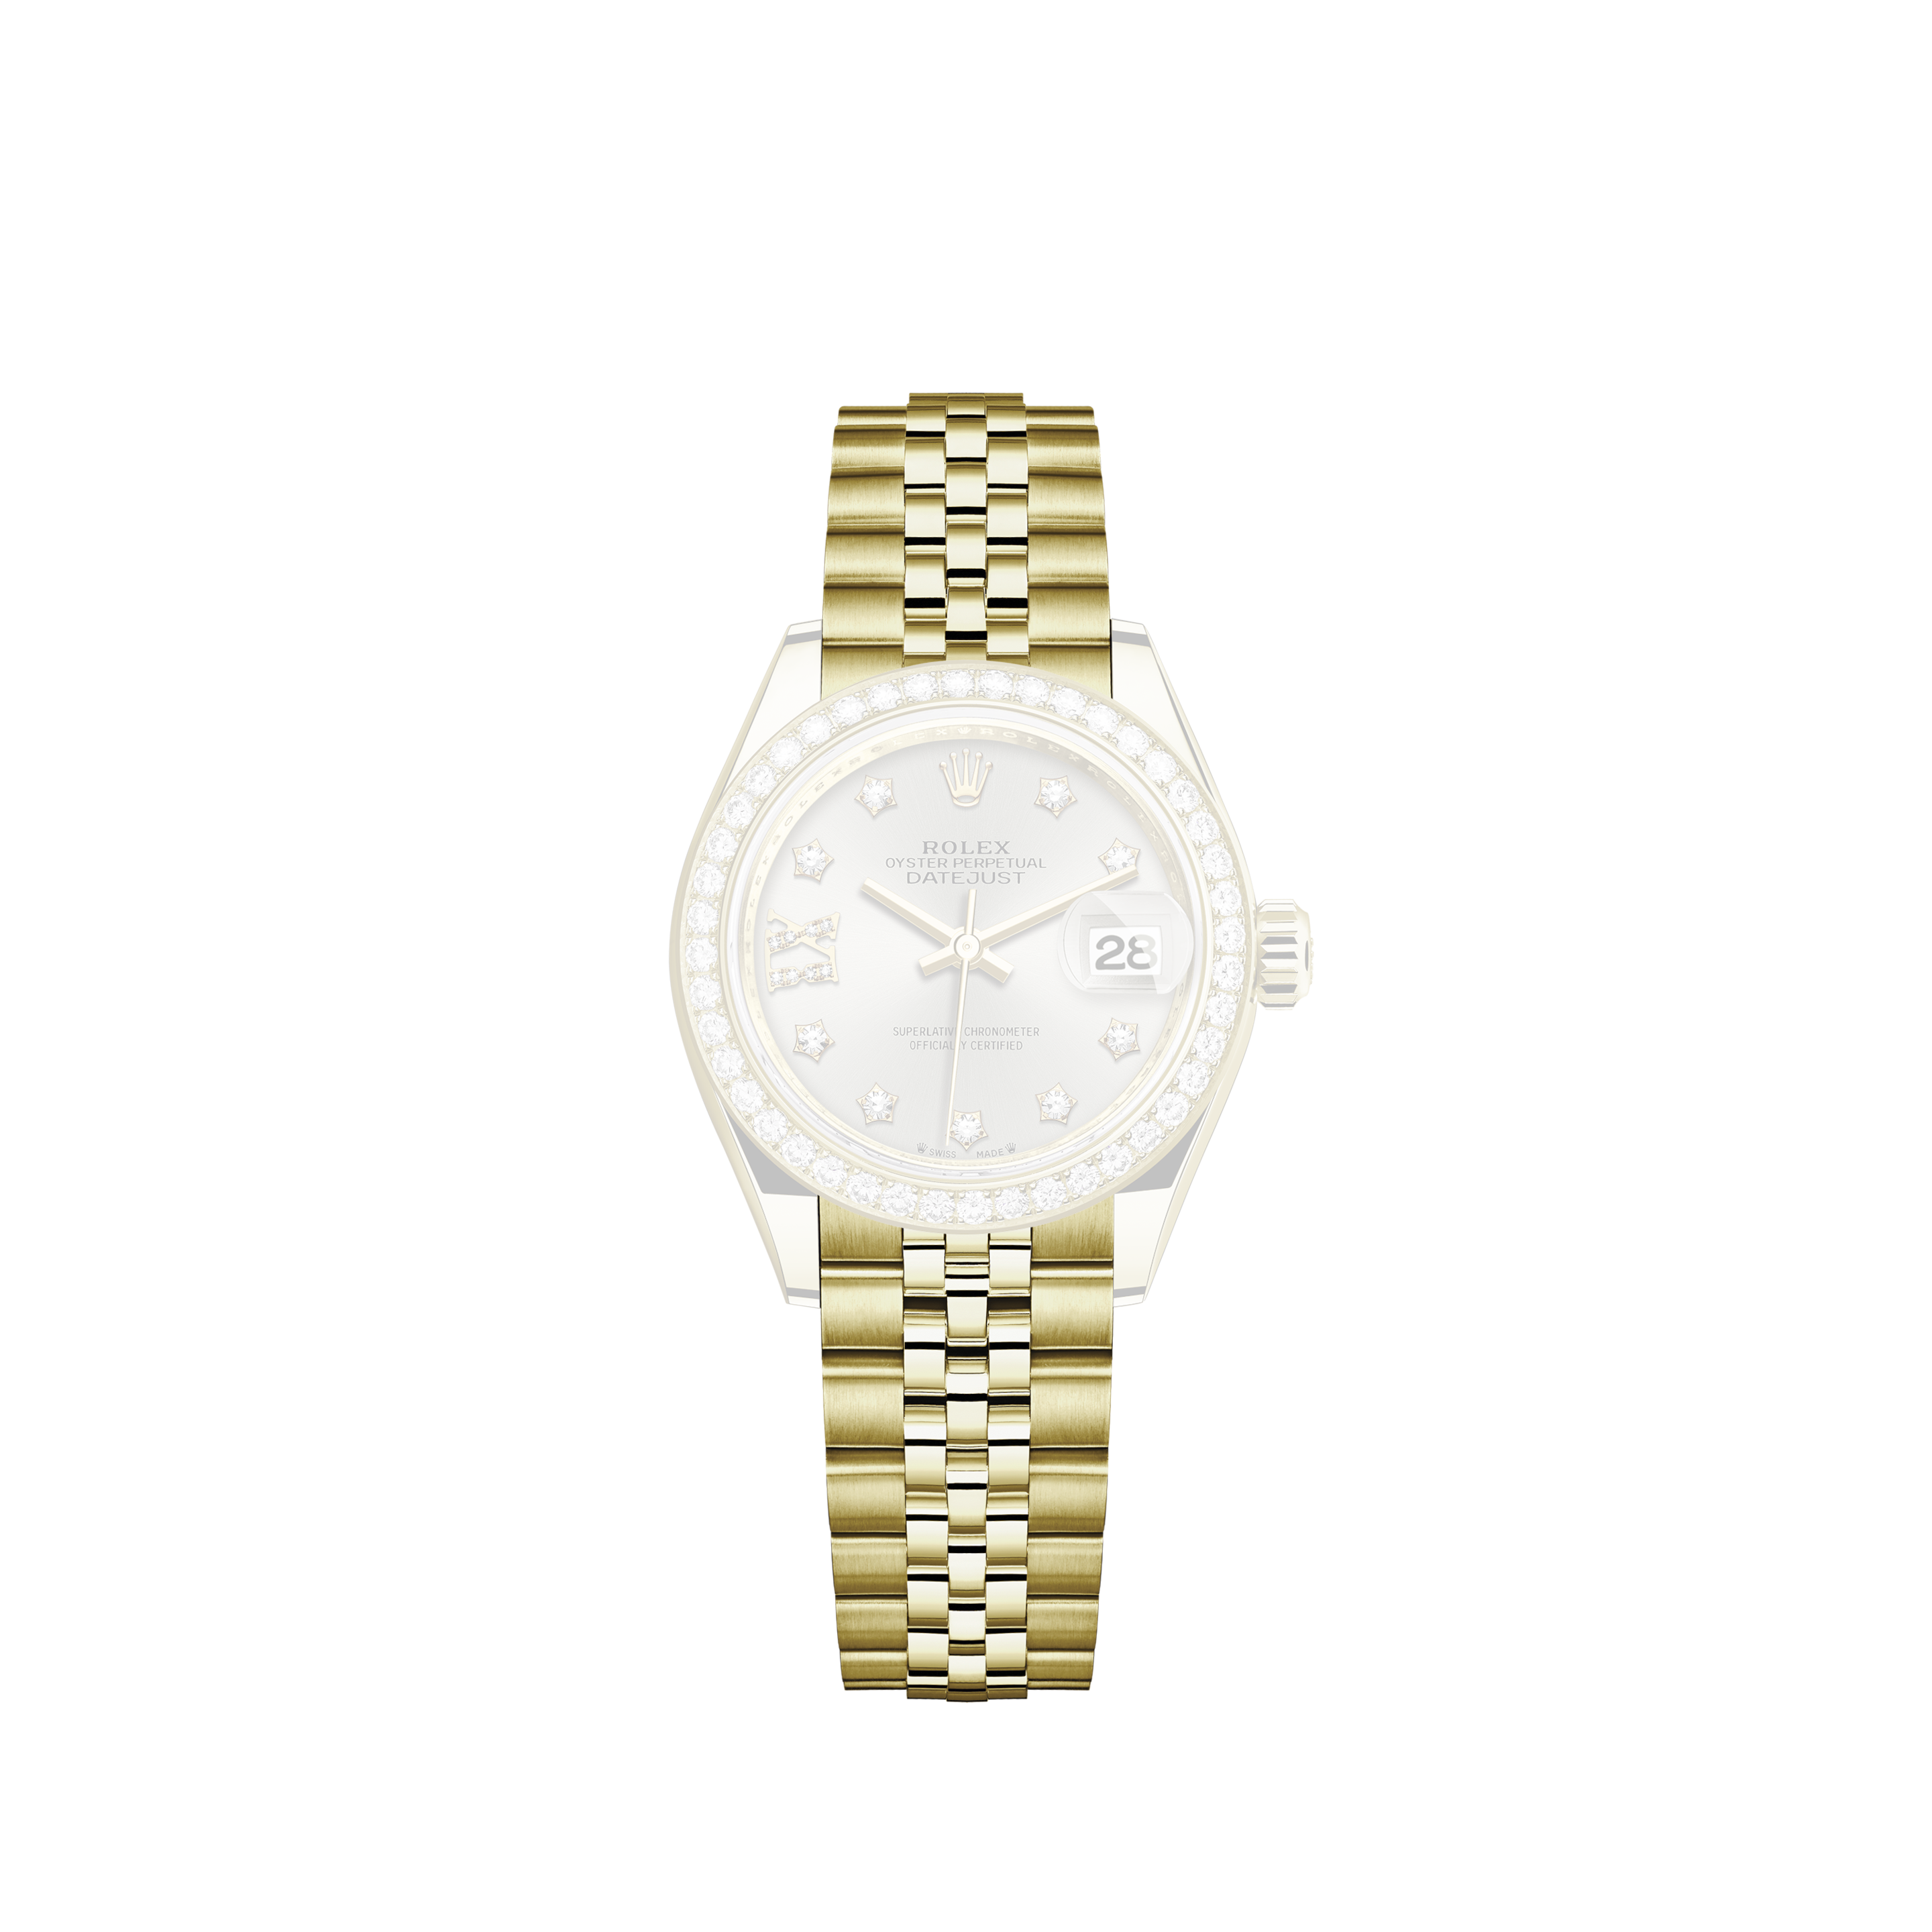 Rolex Datejust 31 Steel / Gold Automatic Women's Watch Oyster Perpetual Ref. 6827